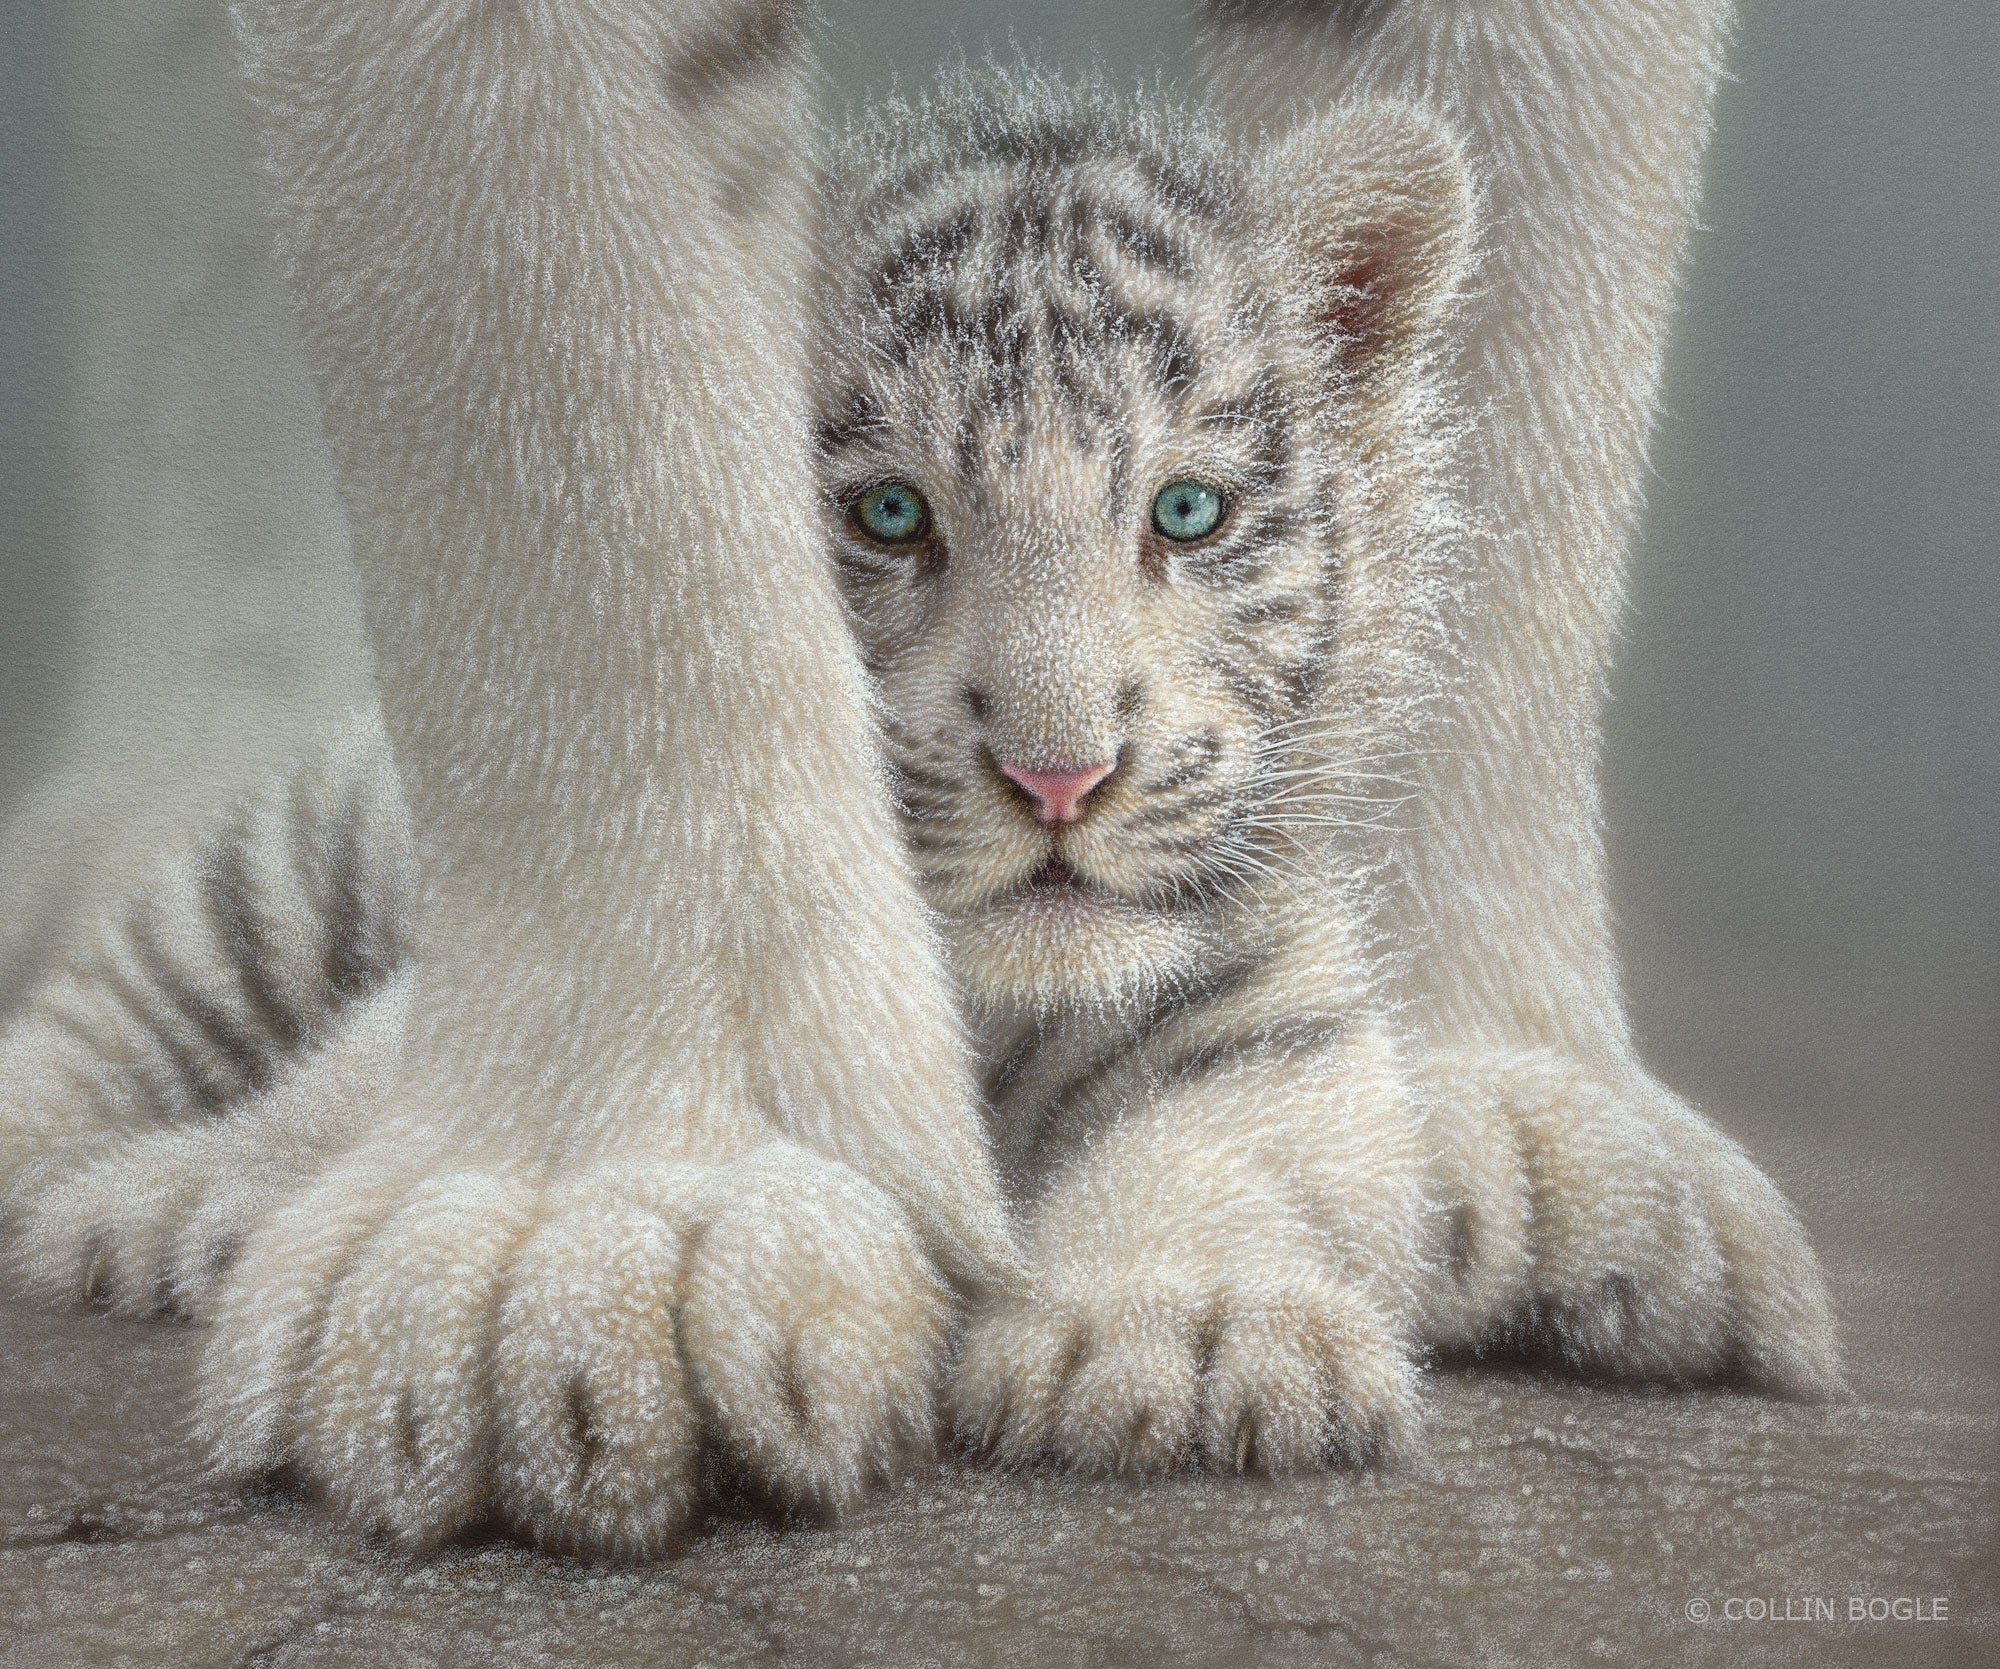 Sheltered - White tiger cub between mothers paws painting art print by Collin Bogle.